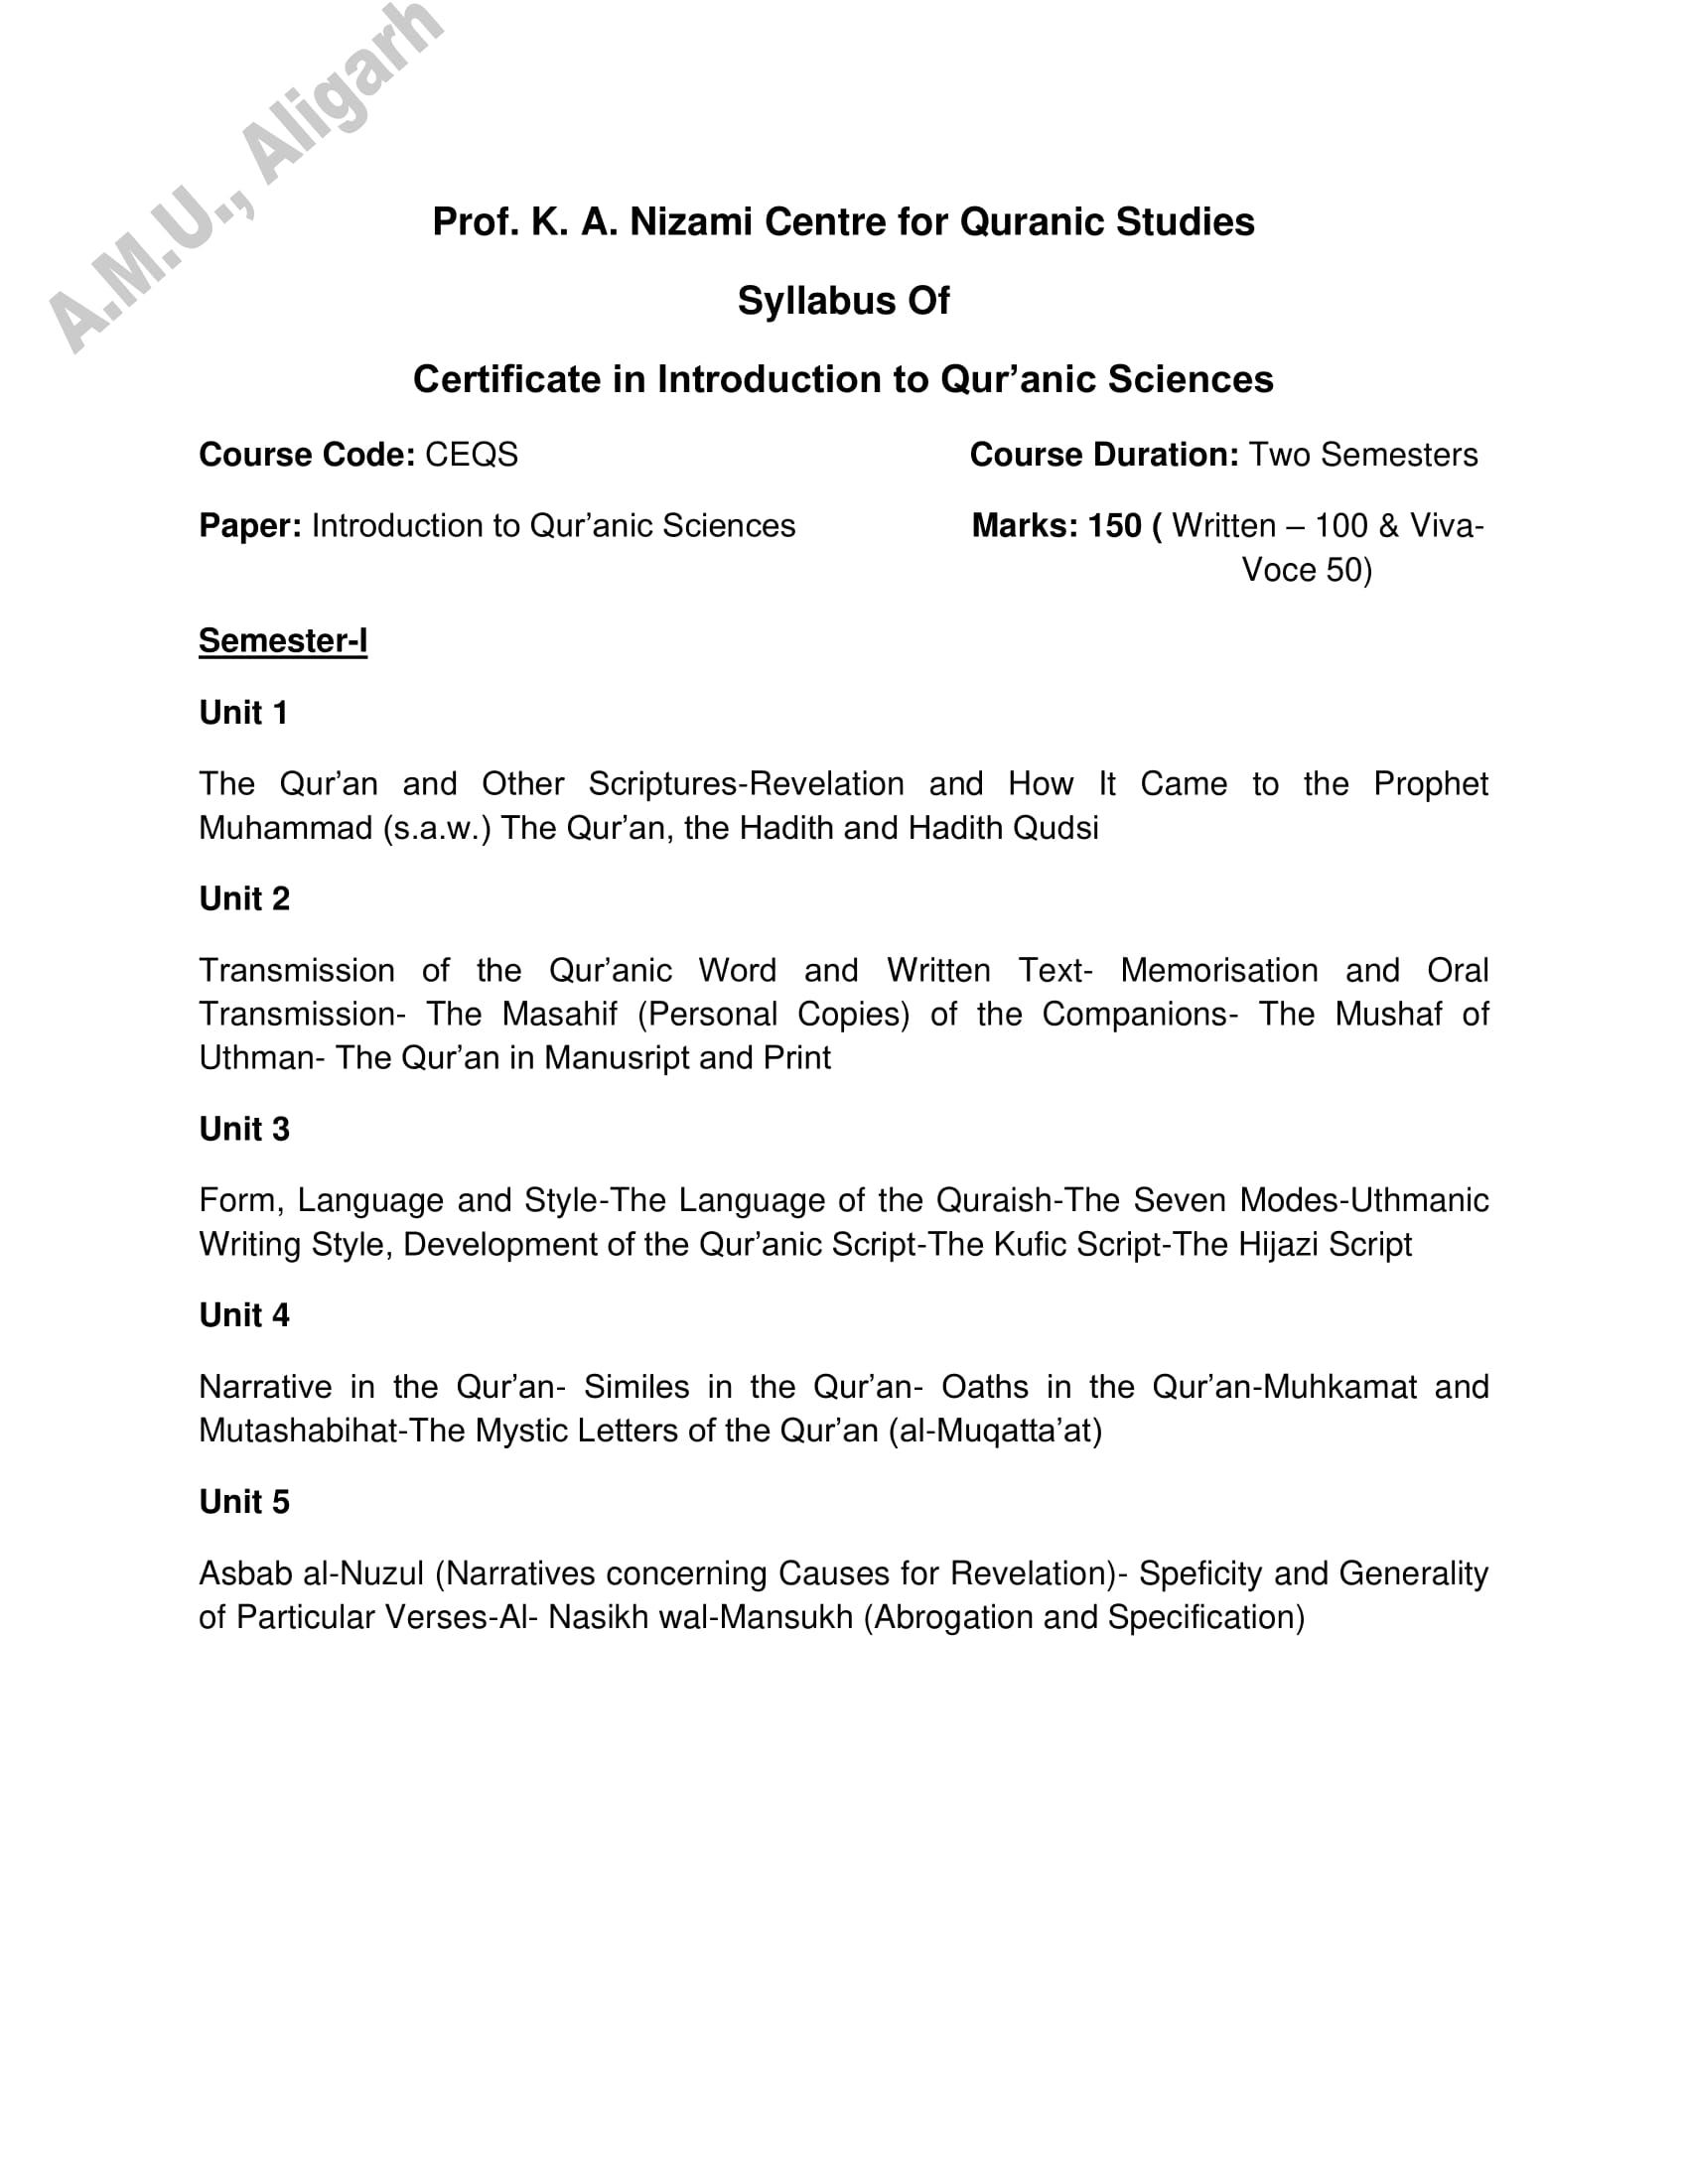 AMU Entrance Exam Syllabus for Certificate in Introduction to Qur’anic Sciences - Page 1